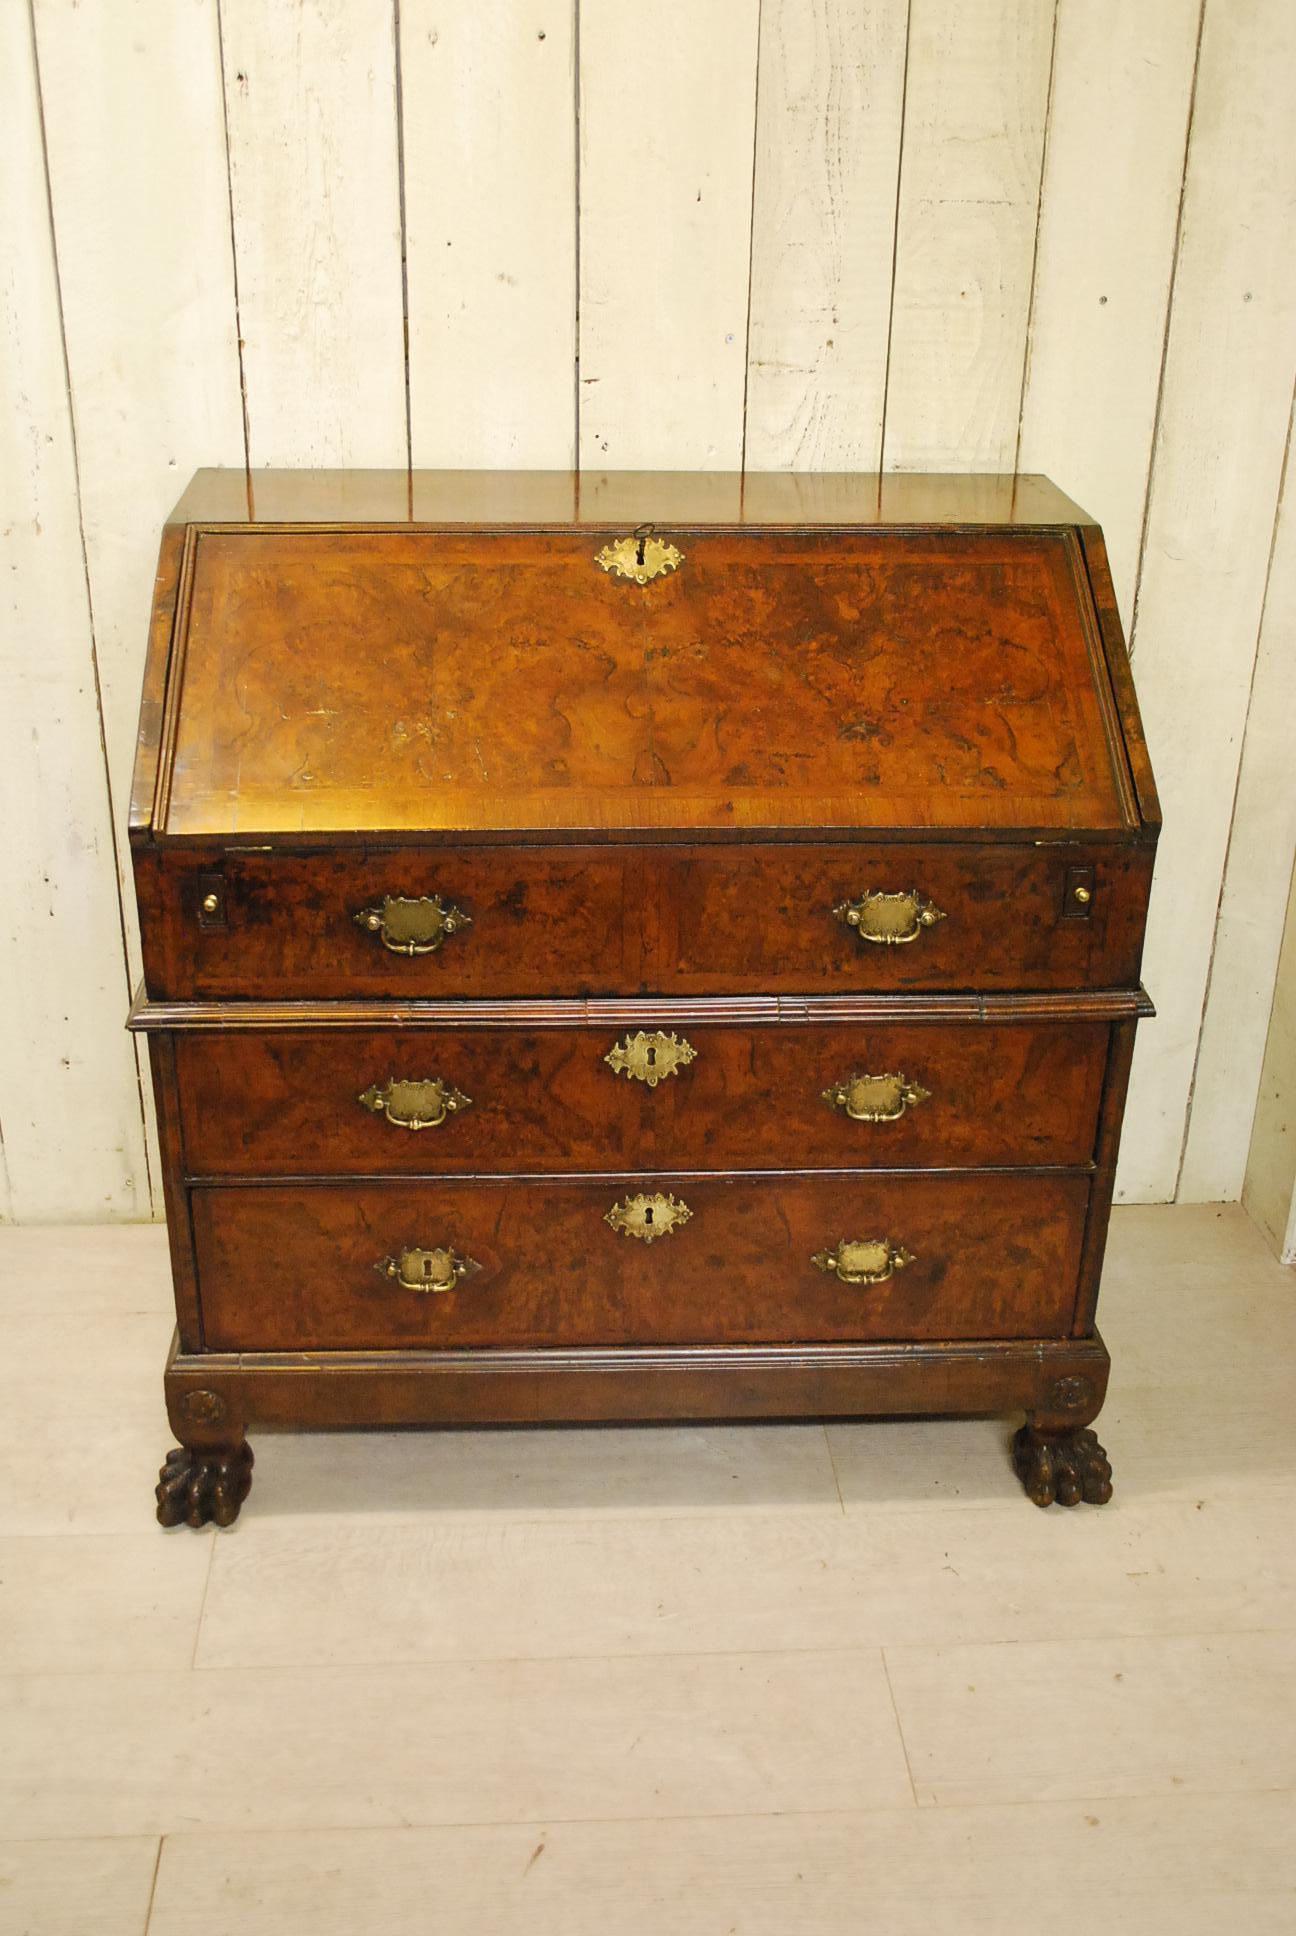 This exquisite English walnut bureau hails from the remarkable Queen Anne period, dating back to approximately 1710. It exudes an air of rarity and uniqueness, boasting an intricate design and exceptional craftsmanship. The bureau is elevated on